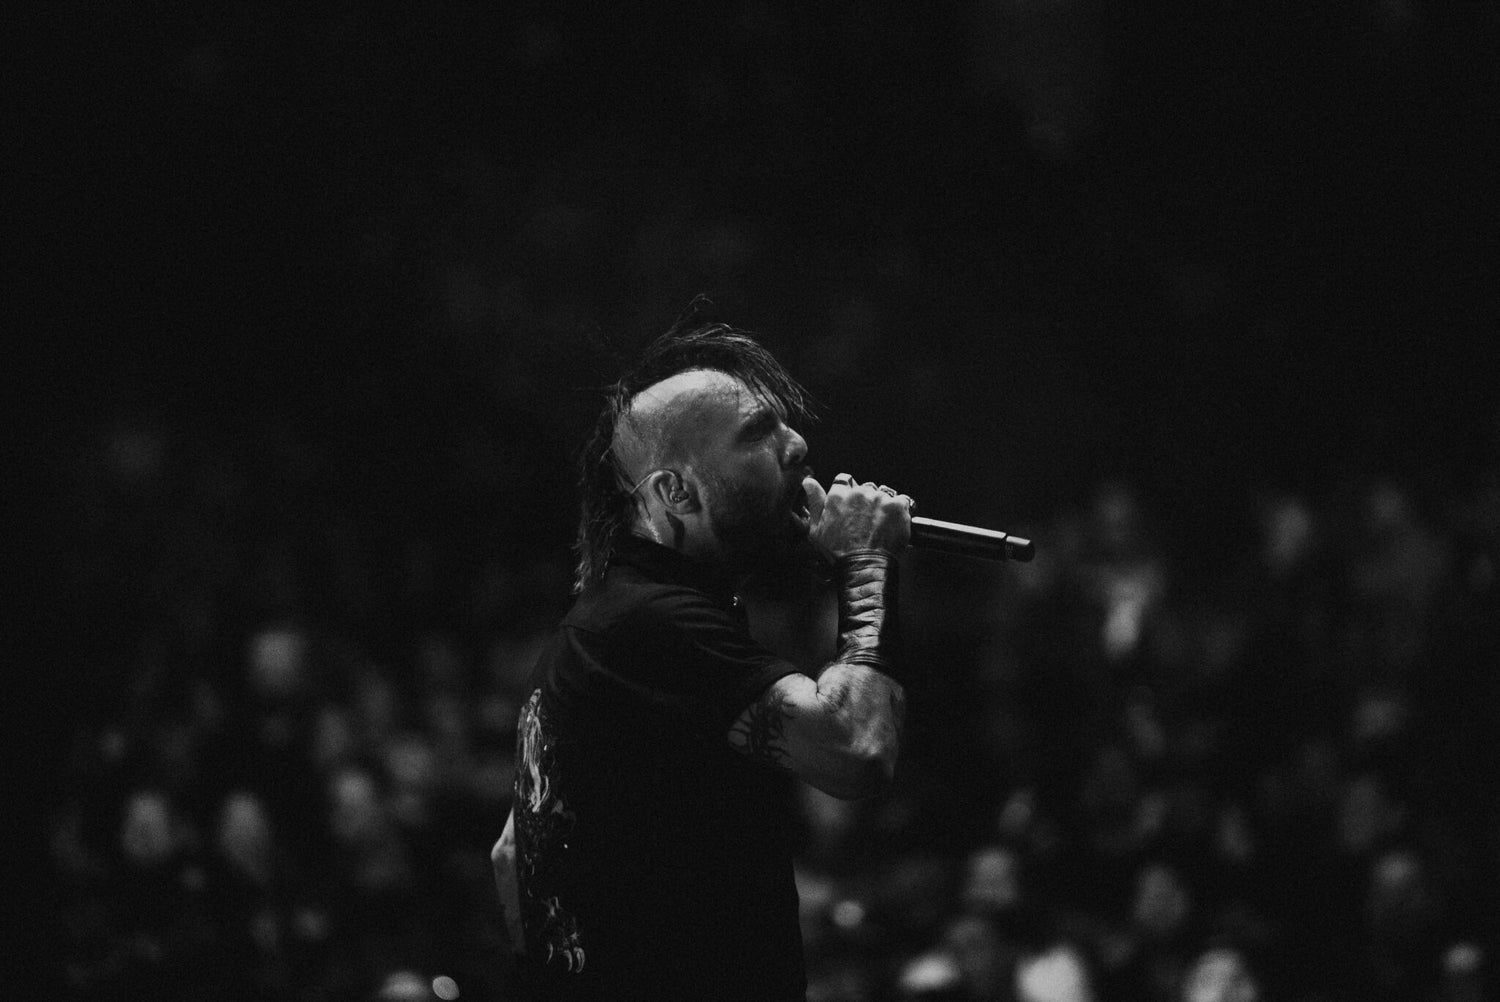 Year In Review: Jesse Leach of Killswitch Engage and Times of Grace delivers his 10 Best Albums of 2021